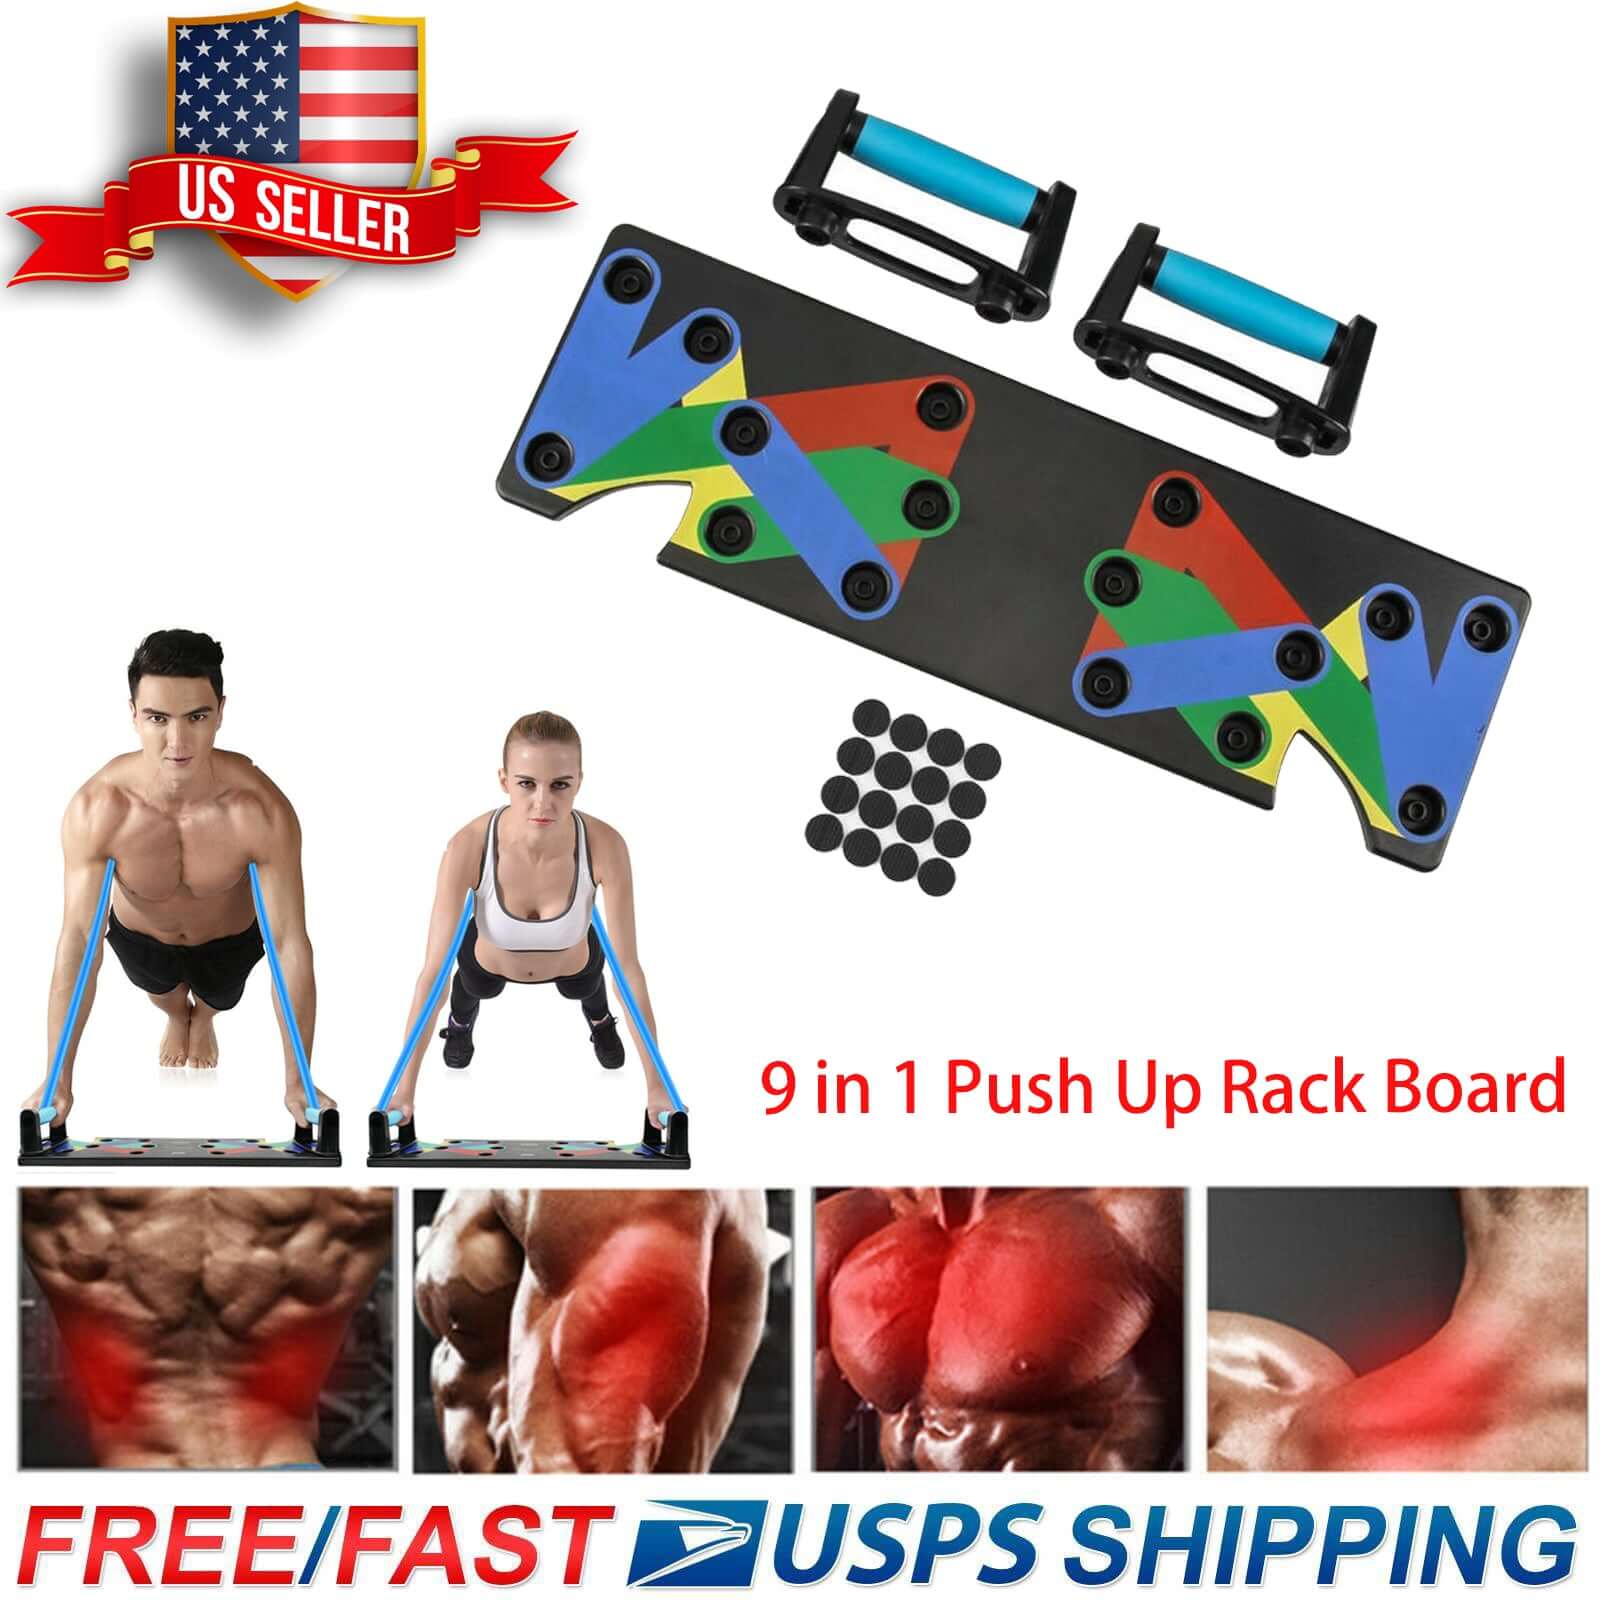 Push up rack board home gym training equipment muscle exercise trainer